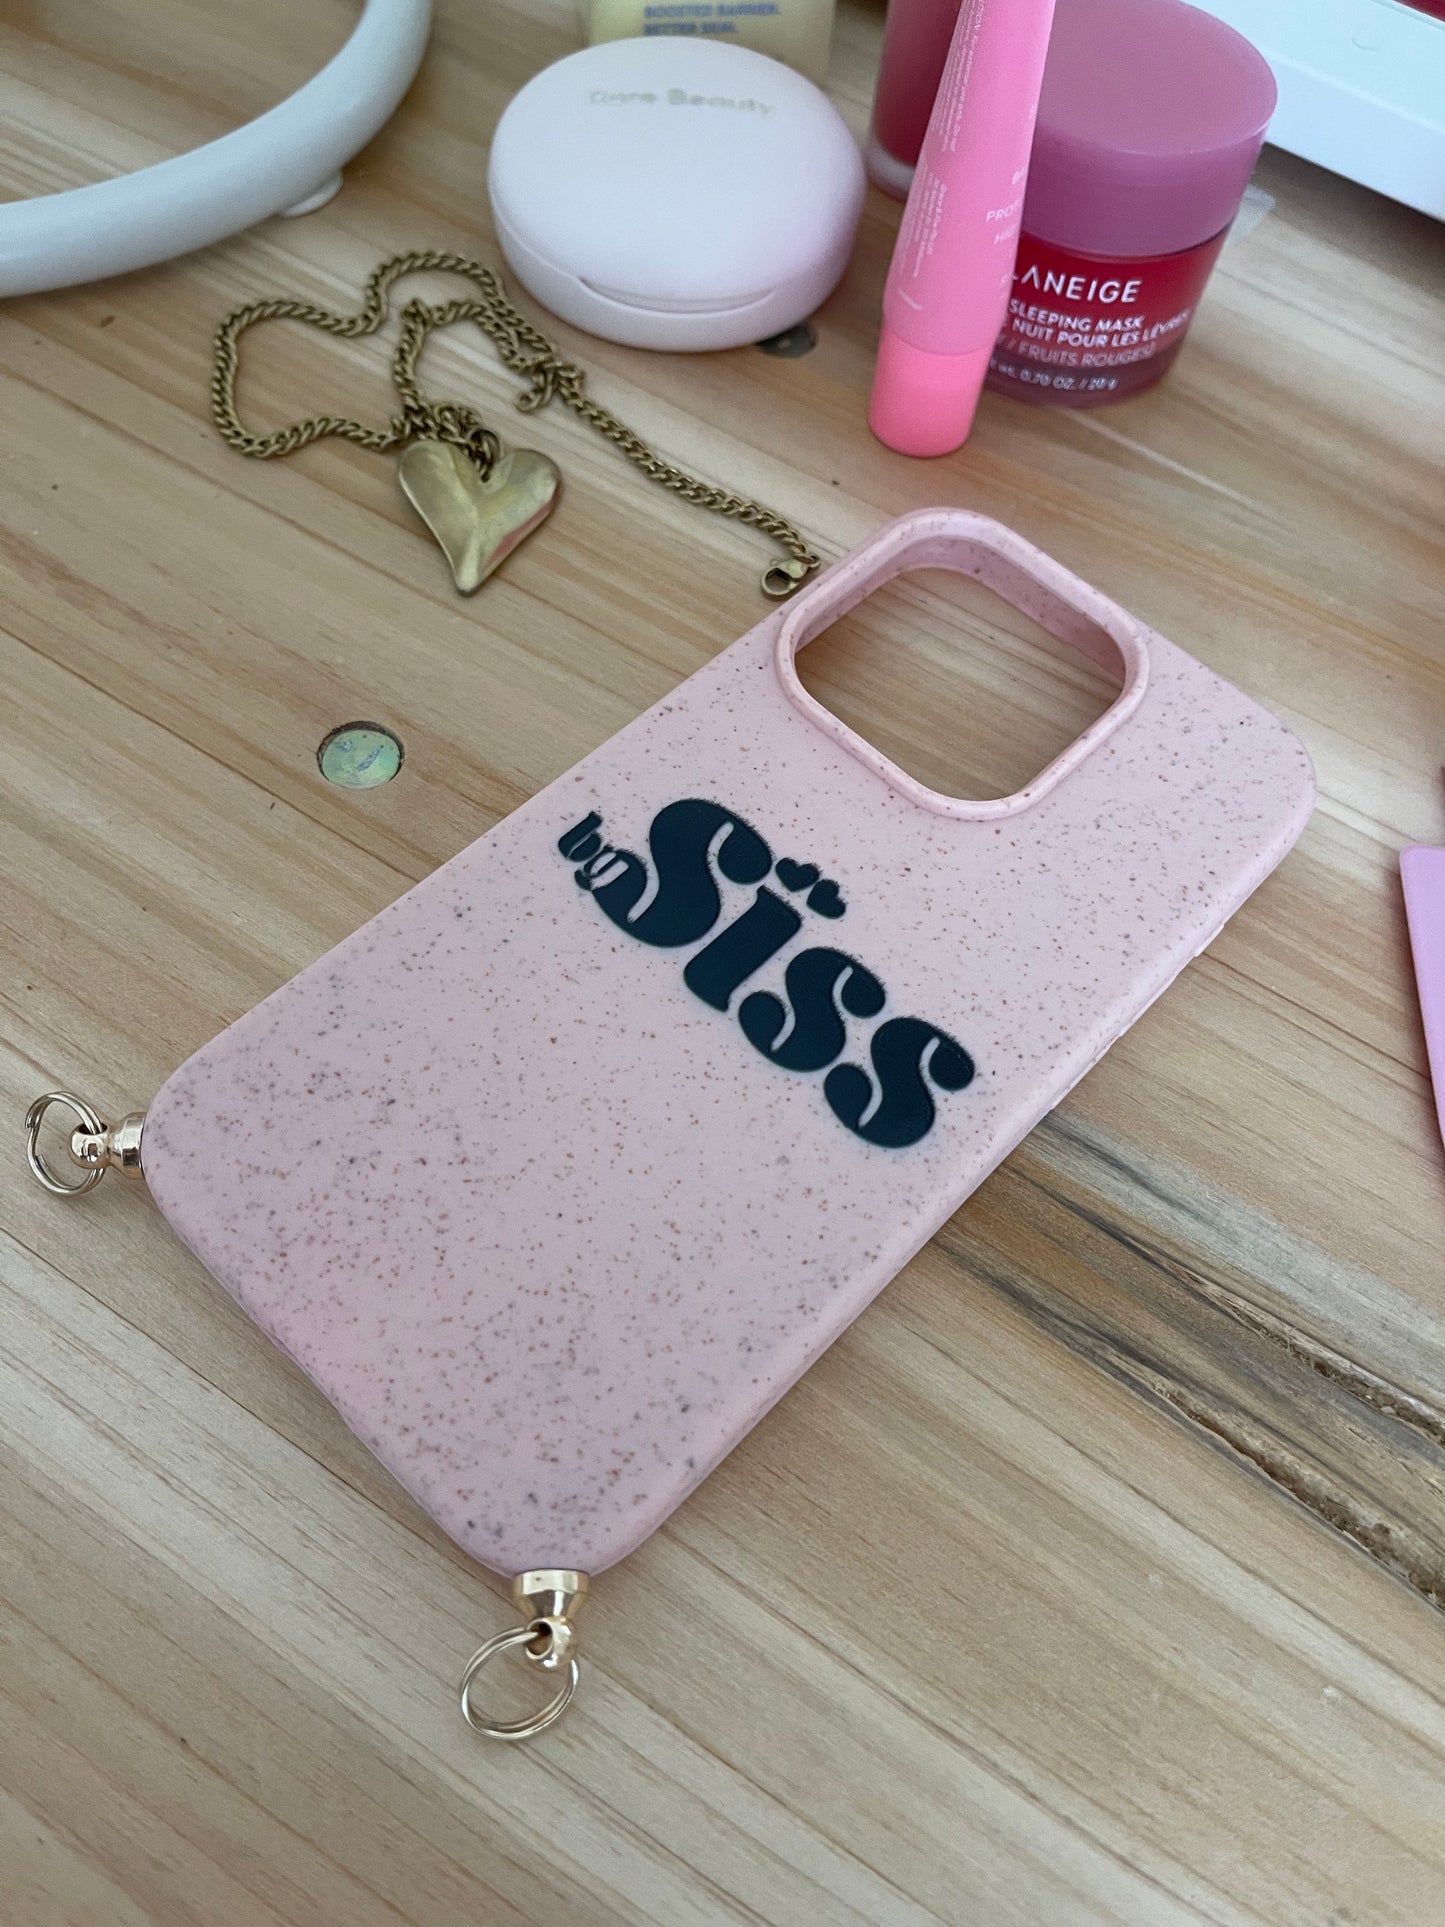 Confetti bySiss phone cover - soft pink